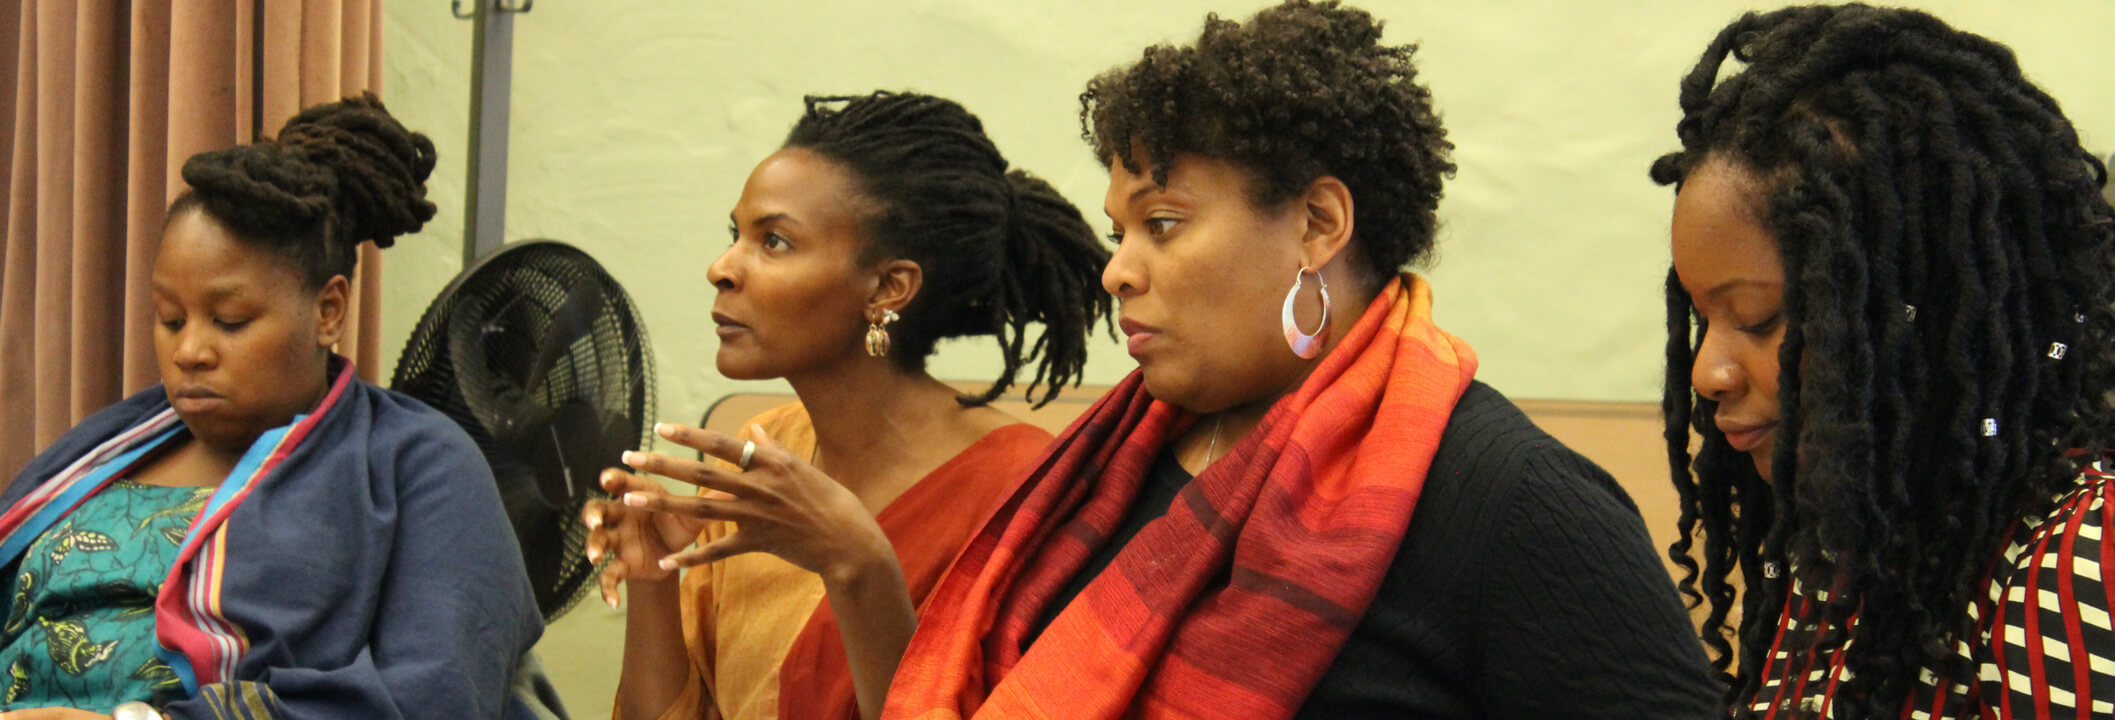 Institute staff member Takiyah Franklin (second from left), along with members of the Atlantic Fellows for Racial Equity, at the 2019 summer learning program held at UC Berkeley